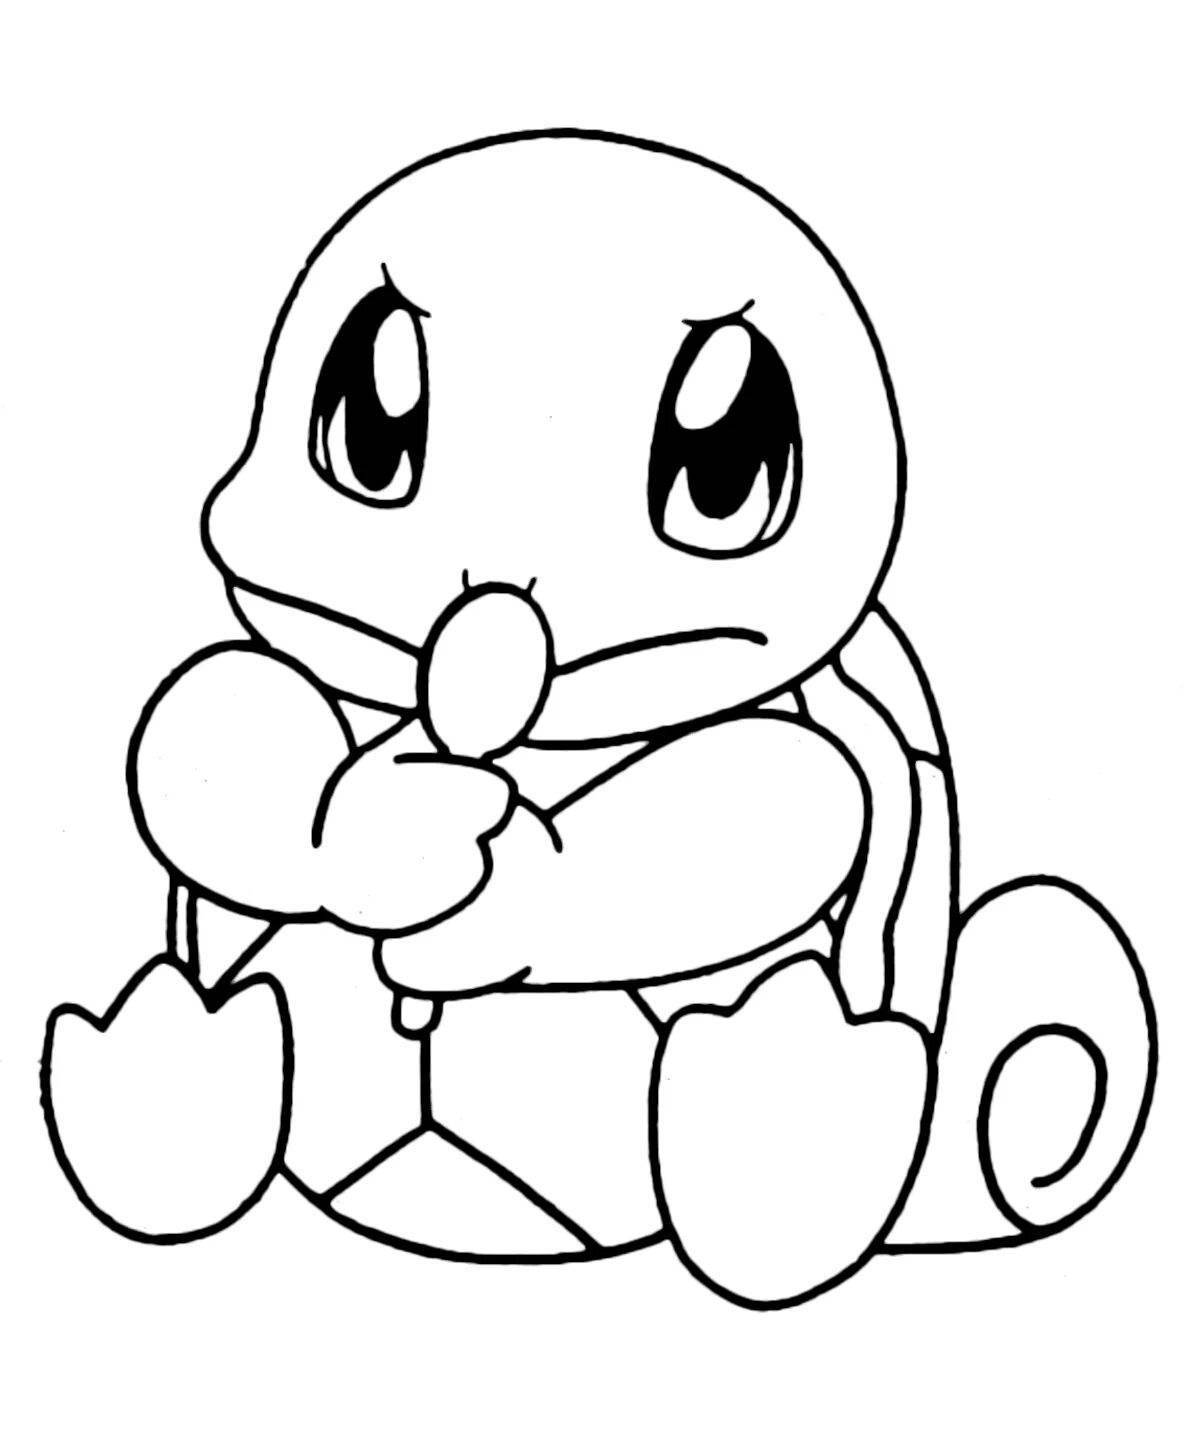 Adorable squirtle pokemon coloring page